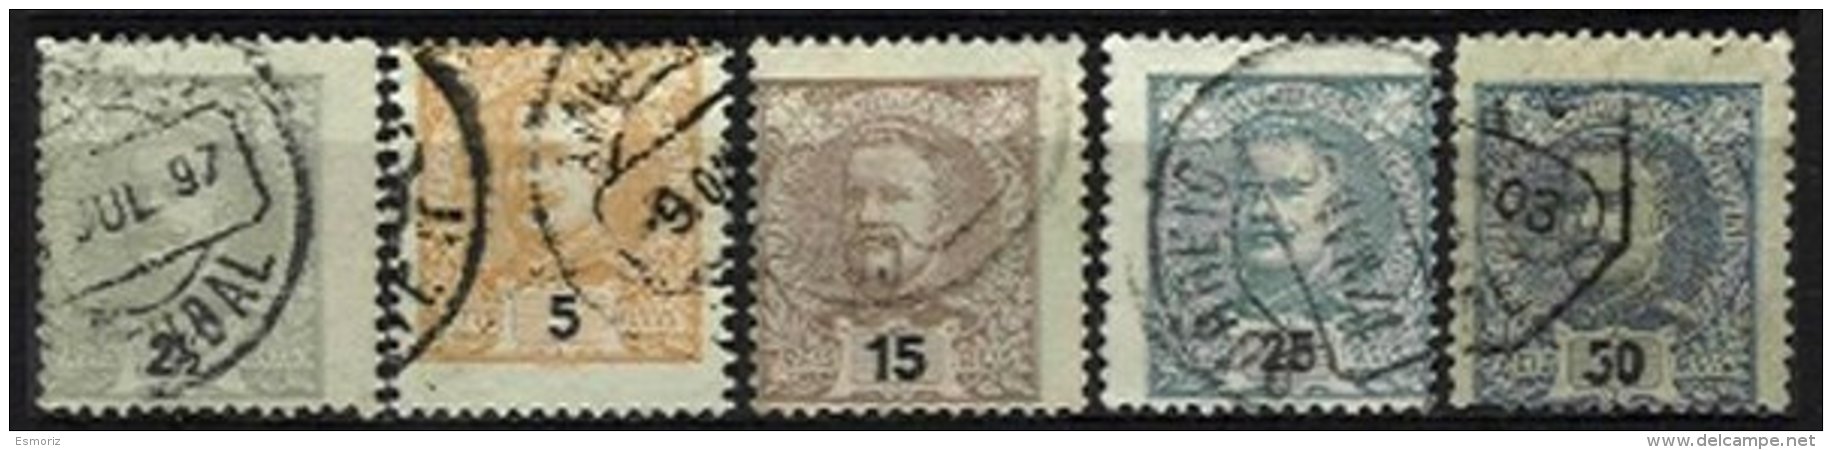 PORTUGAL, AF 126/27, 129, 131/32: Yv 124/25, 127, 130, 132, Shifted Perfs, Used, F/VF - Unused Stamps